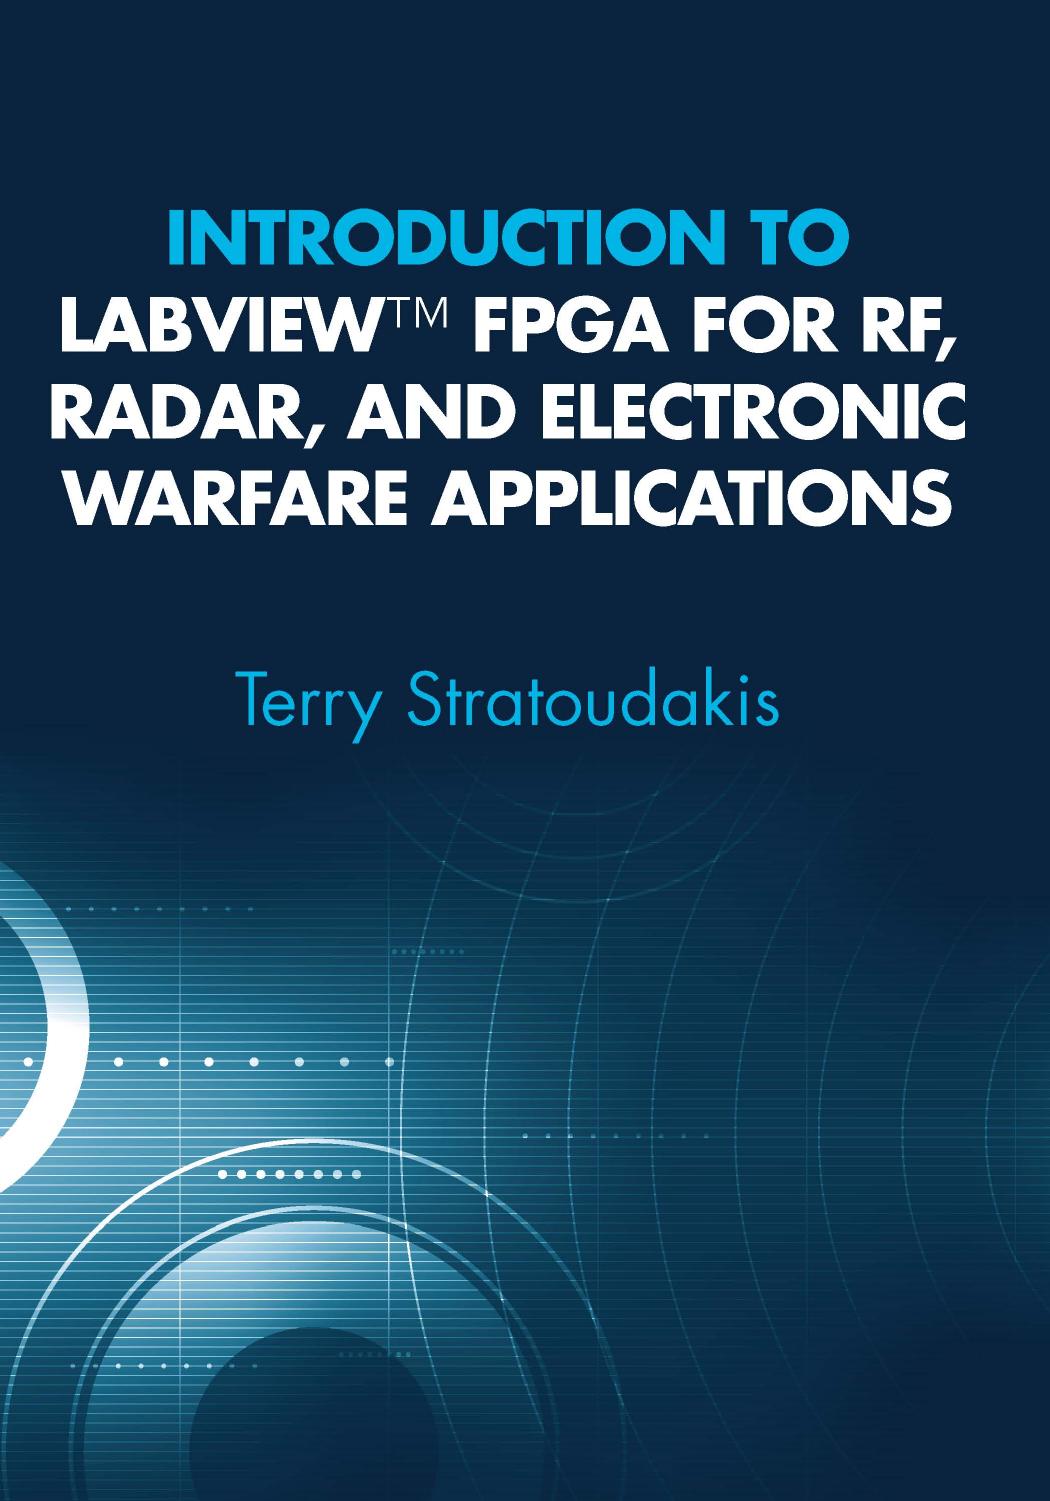 Introduction to LabVIEW(TM) FPGA for RF, Radar, and Electronic Warfare Applications